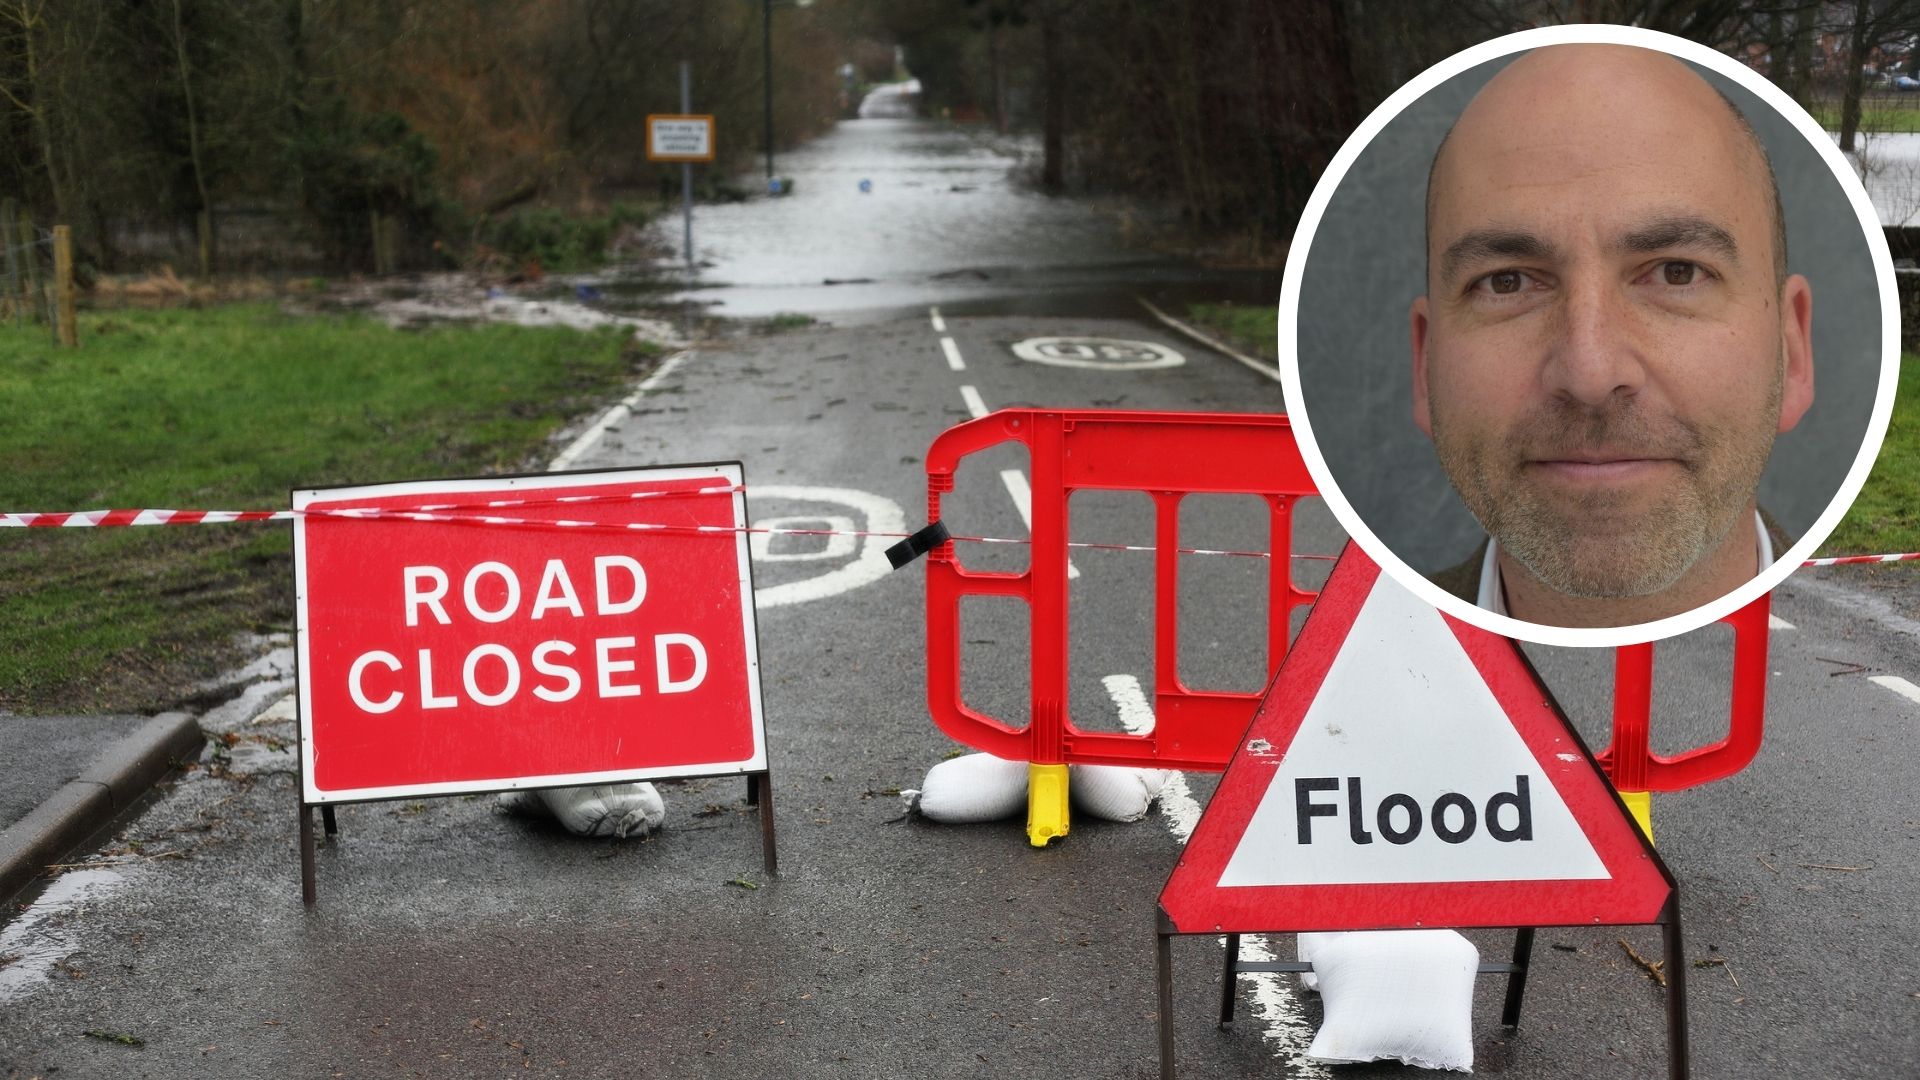 Flood-threatened communities in Mid Suffolk are to get emergency plan support. Inset: Cllr Tim Weller.